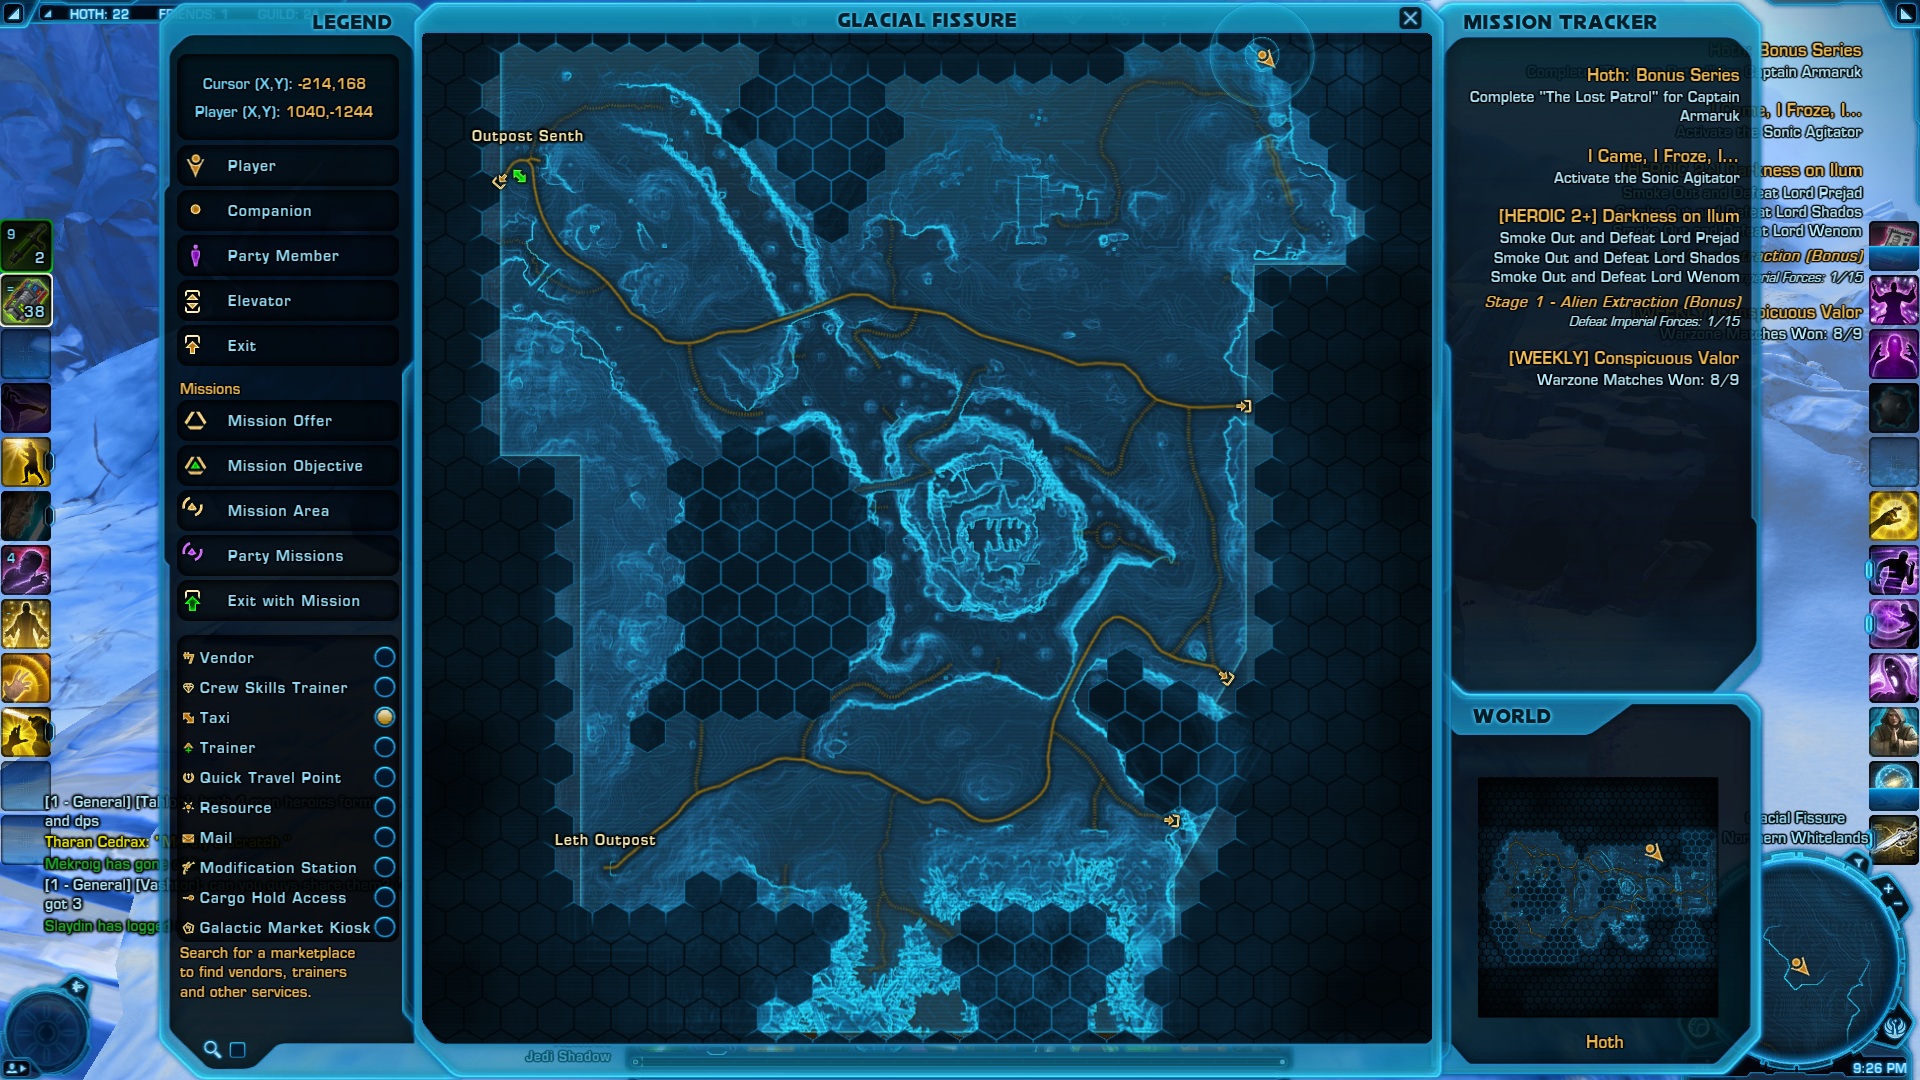 Hoth Presence Datacron Location on the map